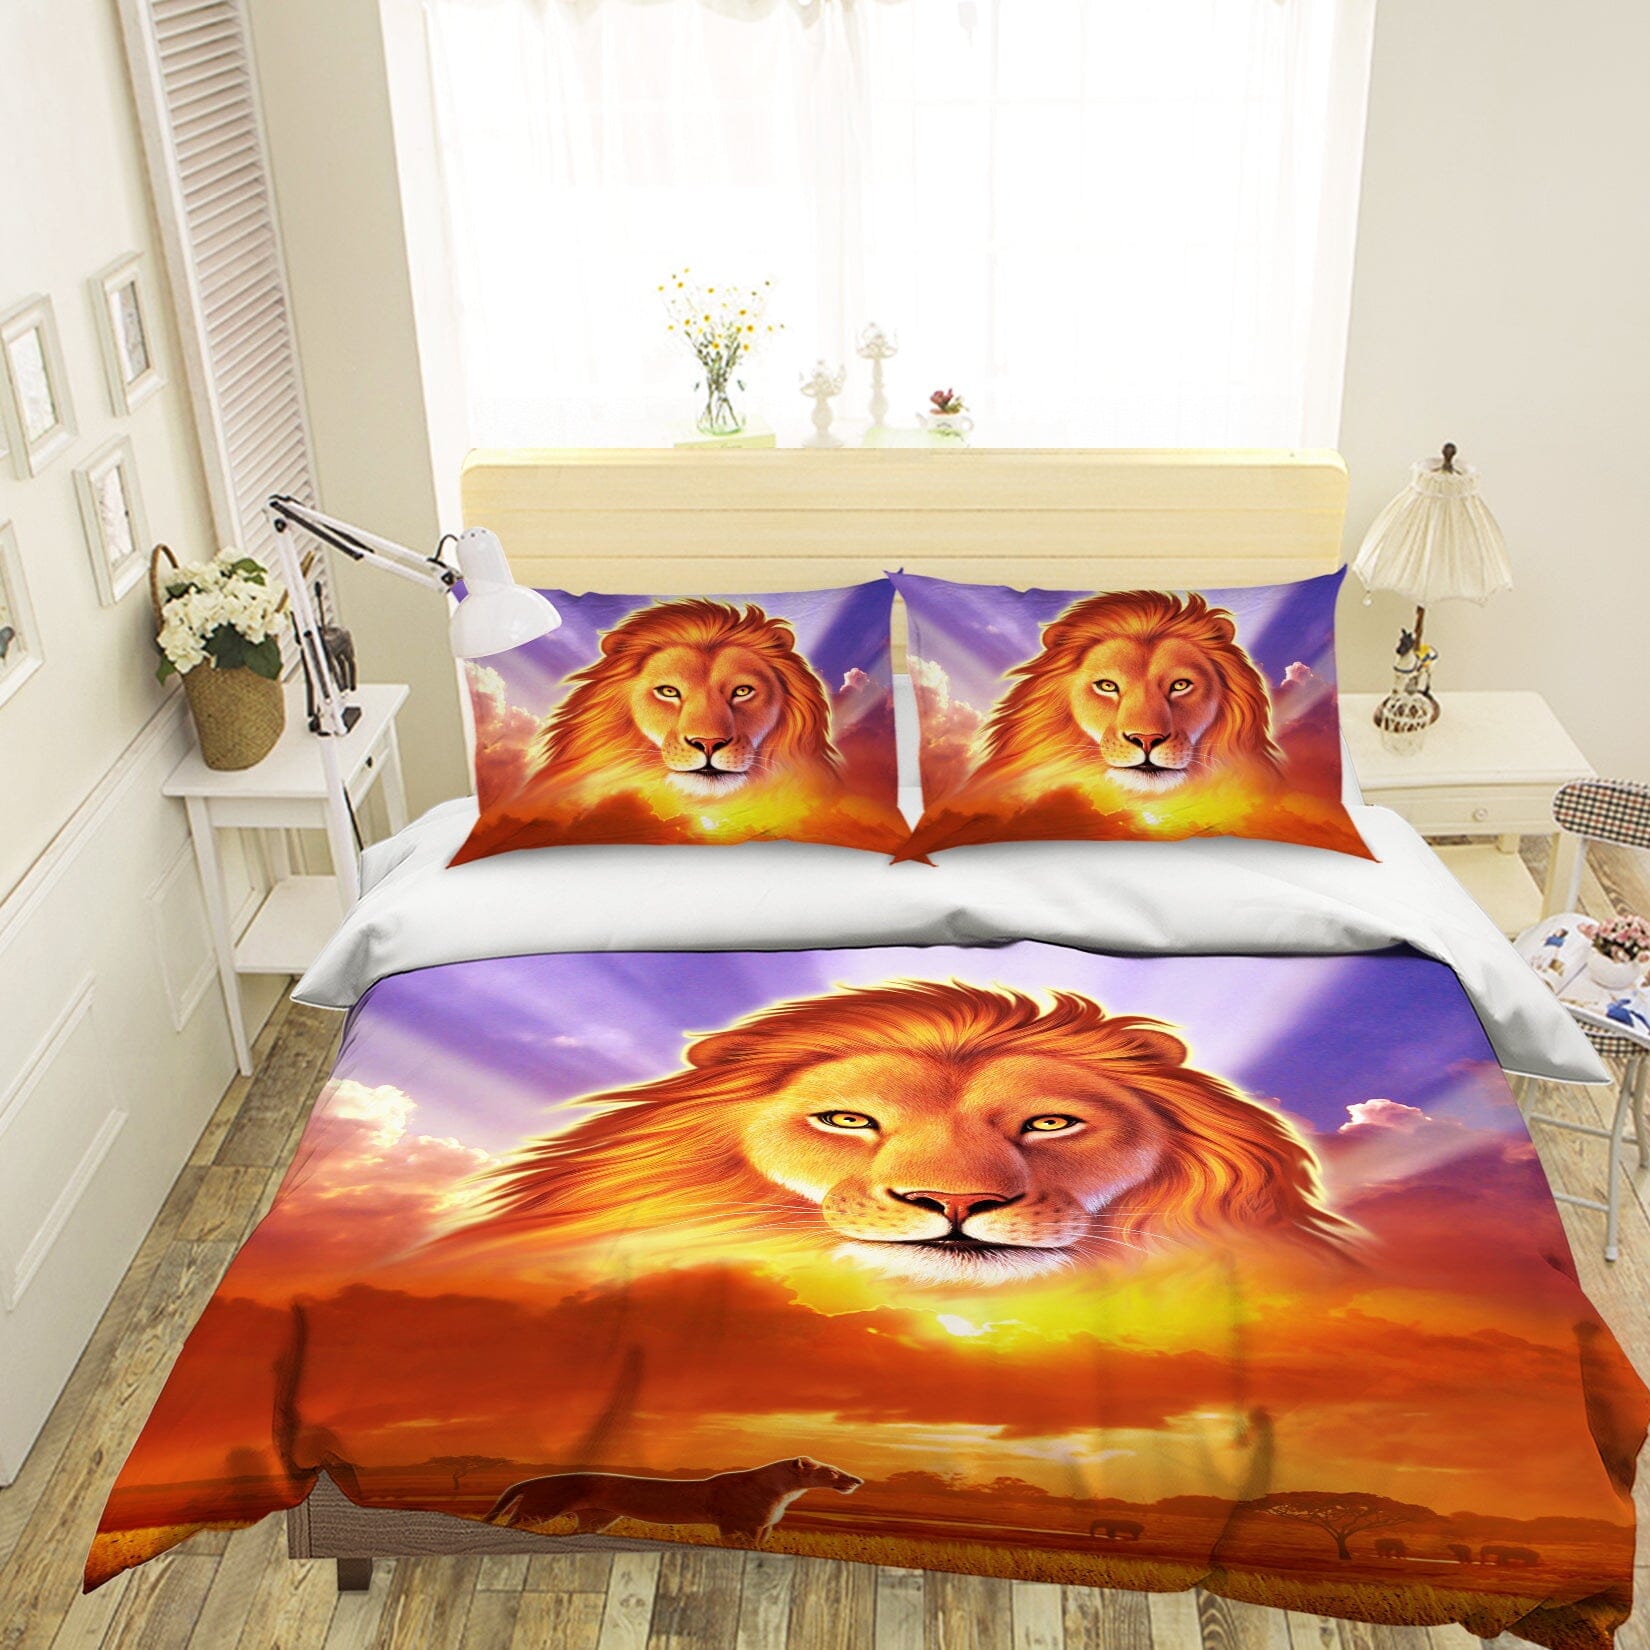 3D Lion King 2126 Jerry LoFaro bedding Bed Pillowcases Quilt Quiet Covers AJ Creativity Home 